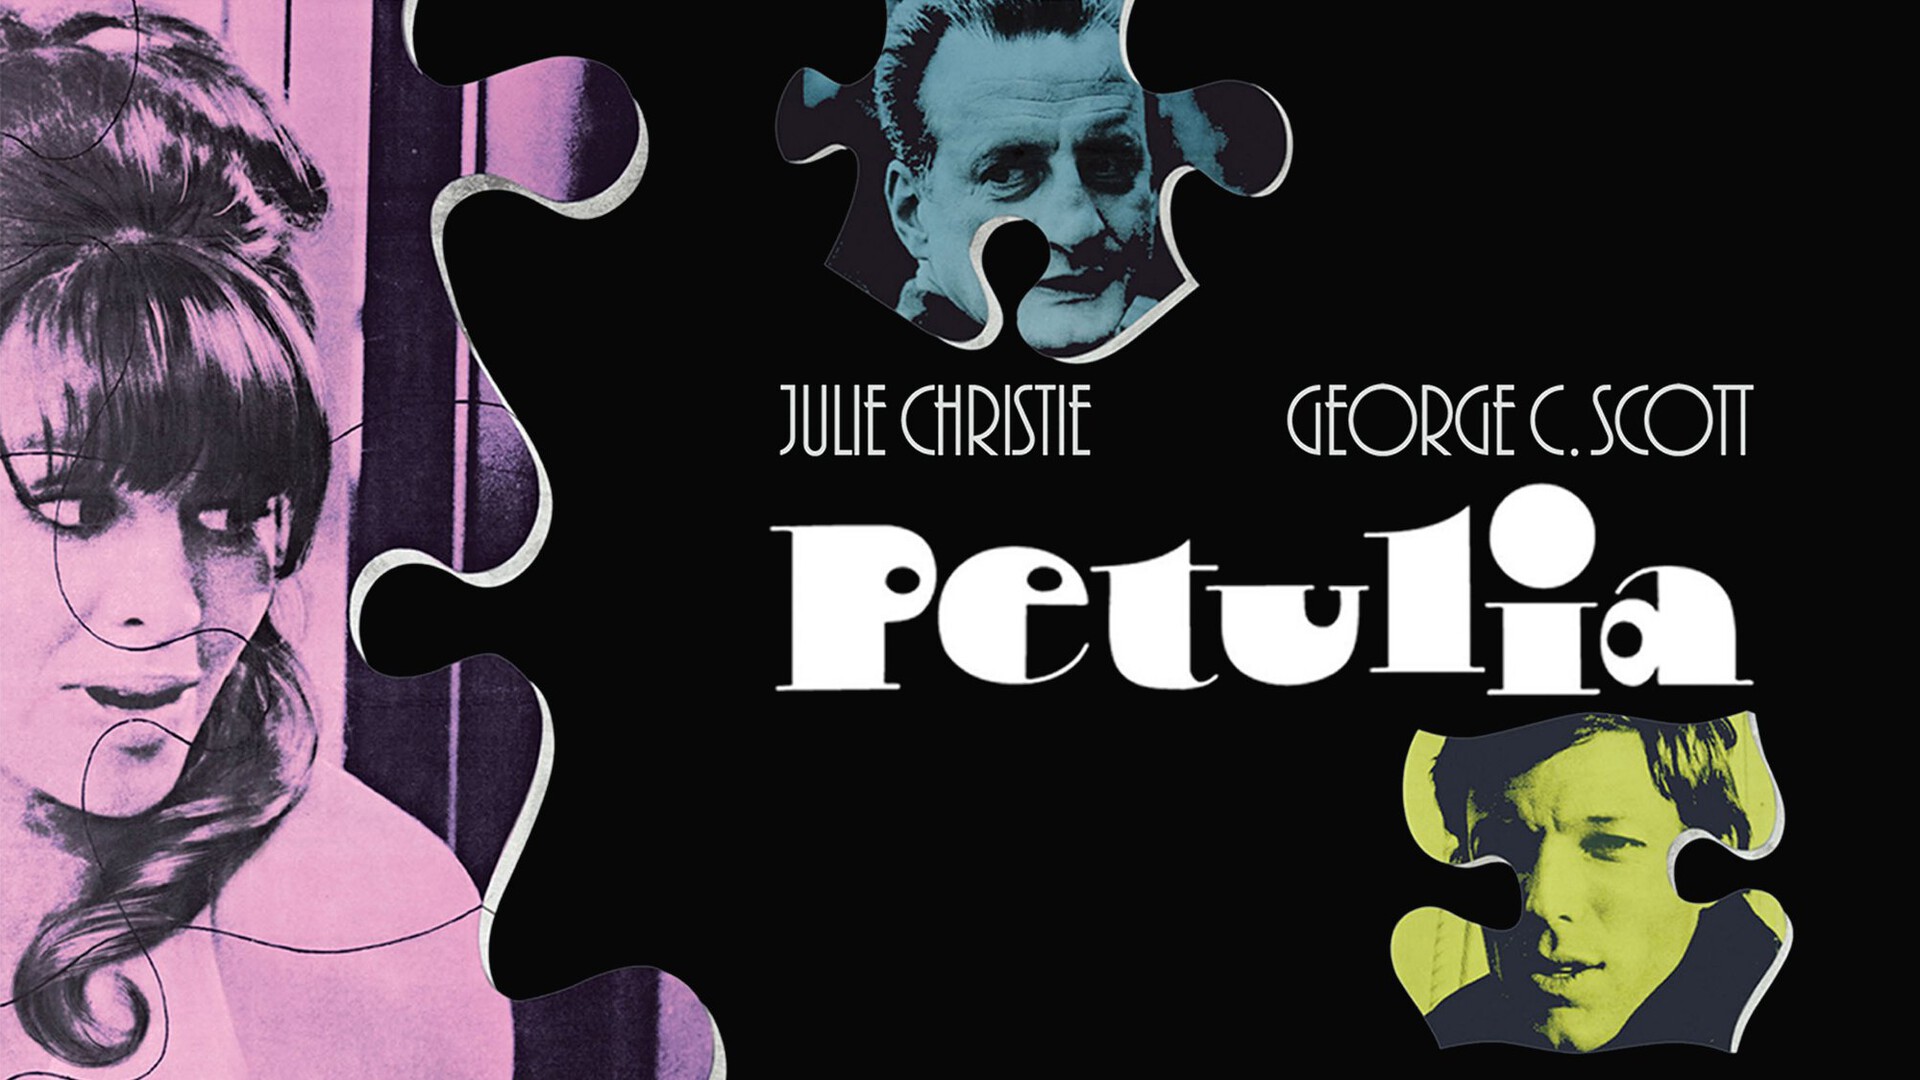 41-facts-about-the-movie-petulia